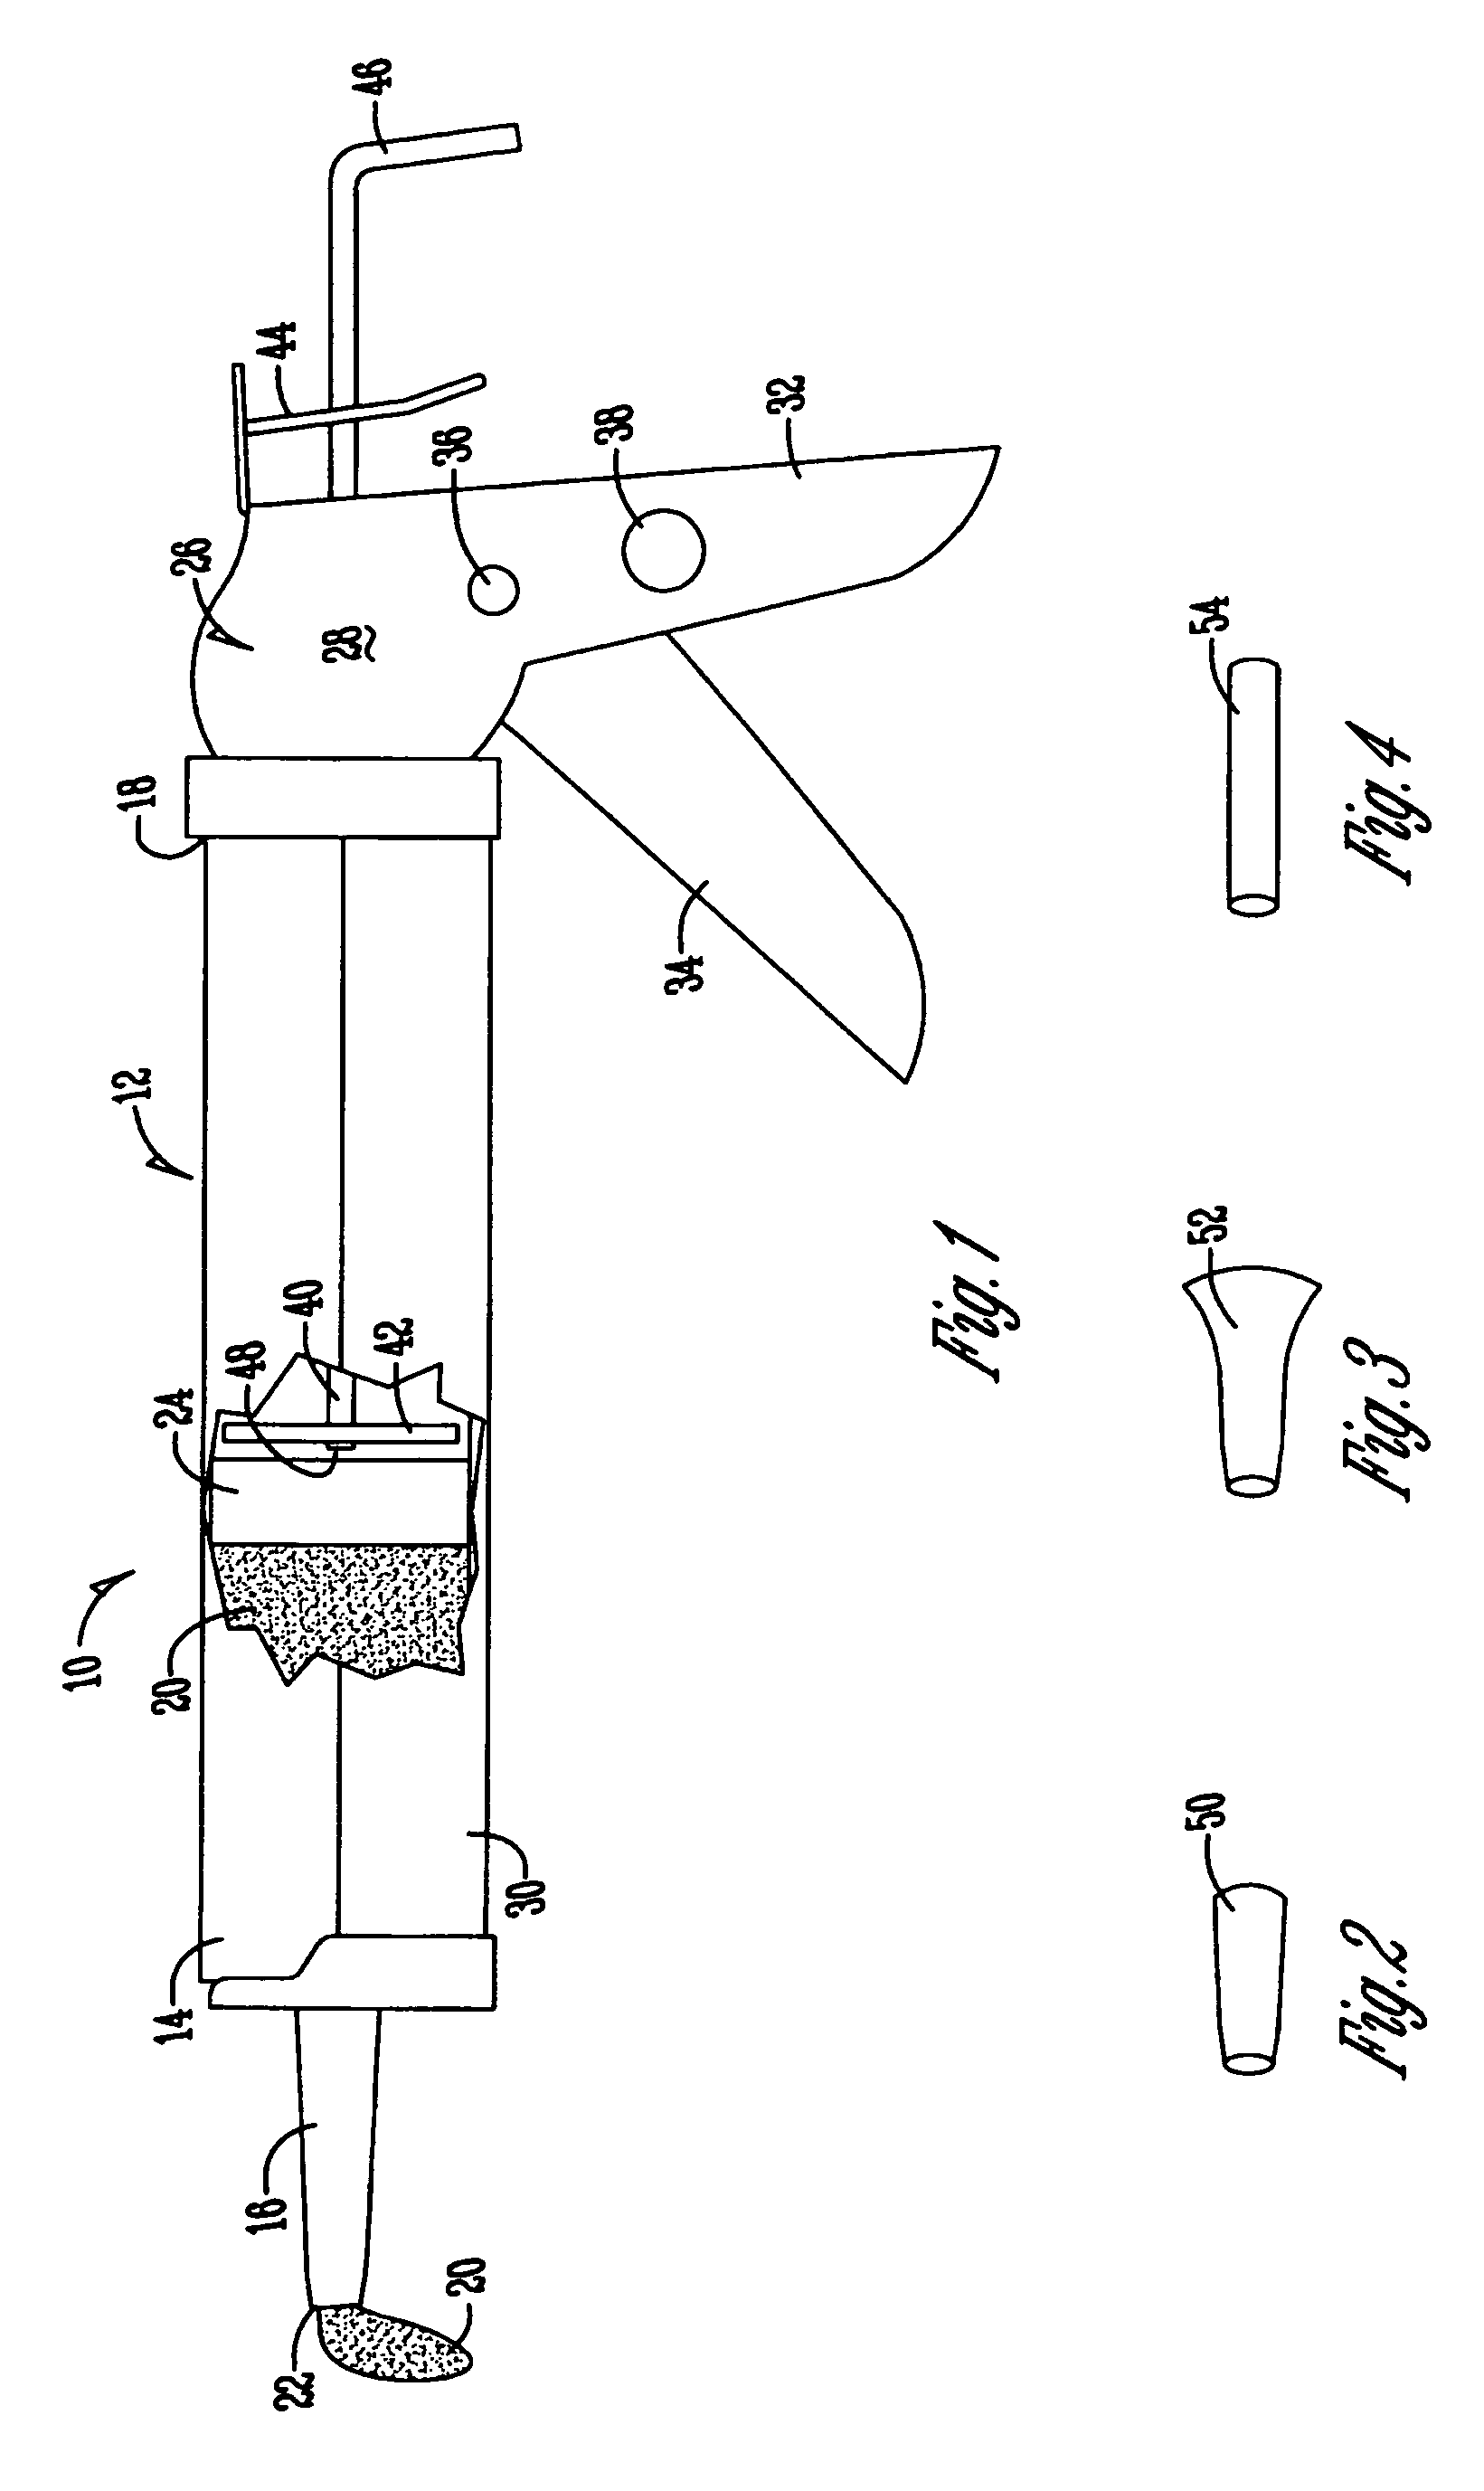 Food delivery apparatus and method of use